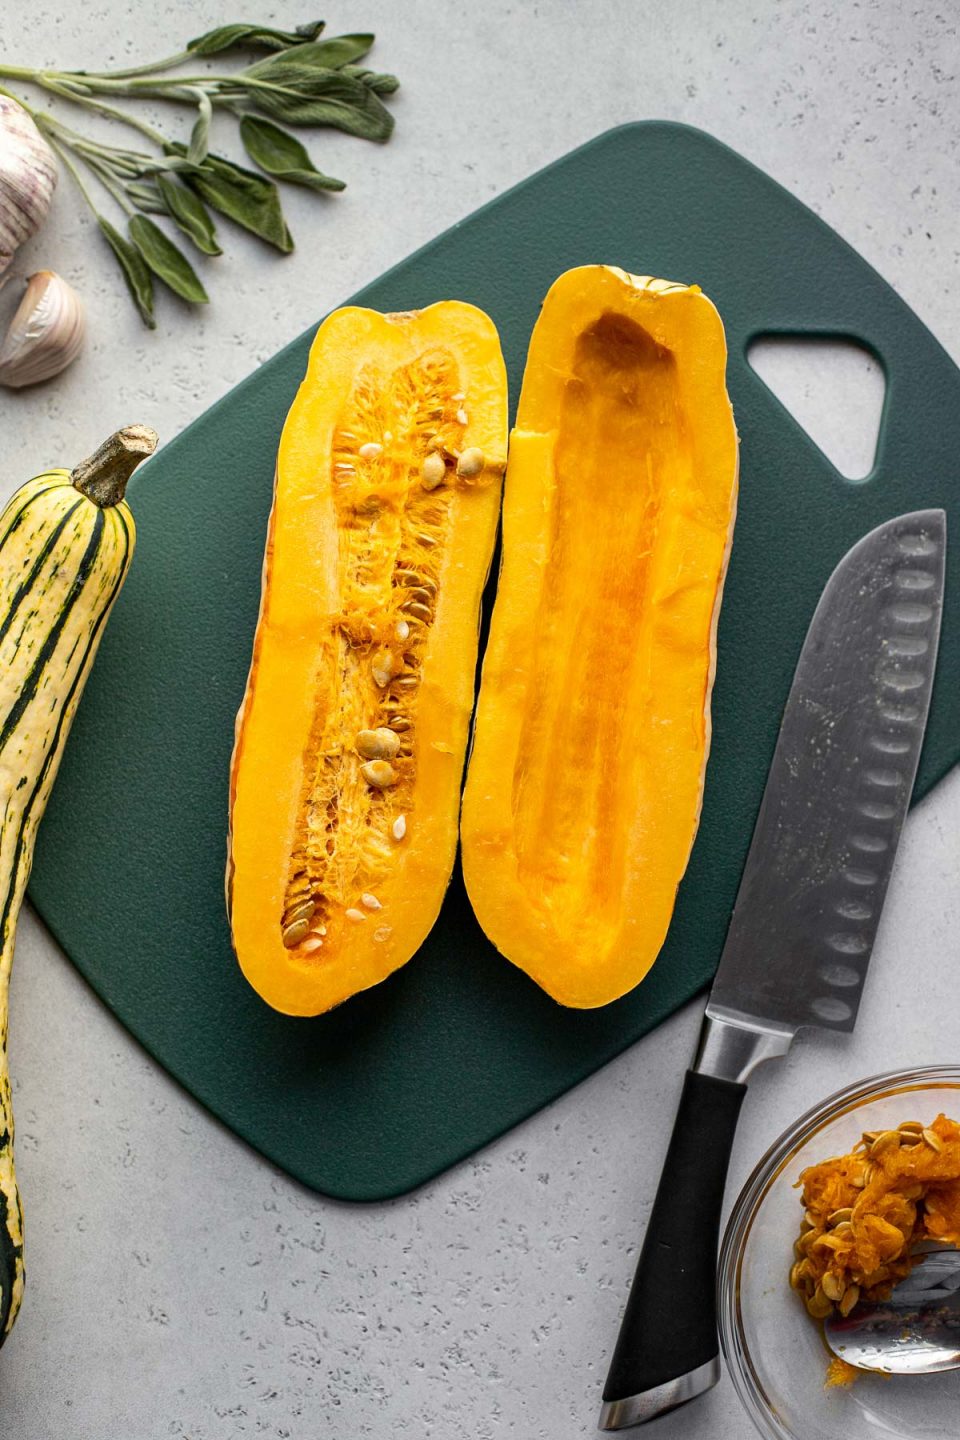 Two cut halves of a delicata squash lay skin side down on a dark green plastic cutting board. One of the halves has had the seeds scooped out, while the seeds remain intact in the other. A chef's knife rests on the cutting board. A small clear glass bowl filled with delicata seeds and a spoon, another whole delicata squash, some loose fresh herbs, and garlic surround the cutting board.